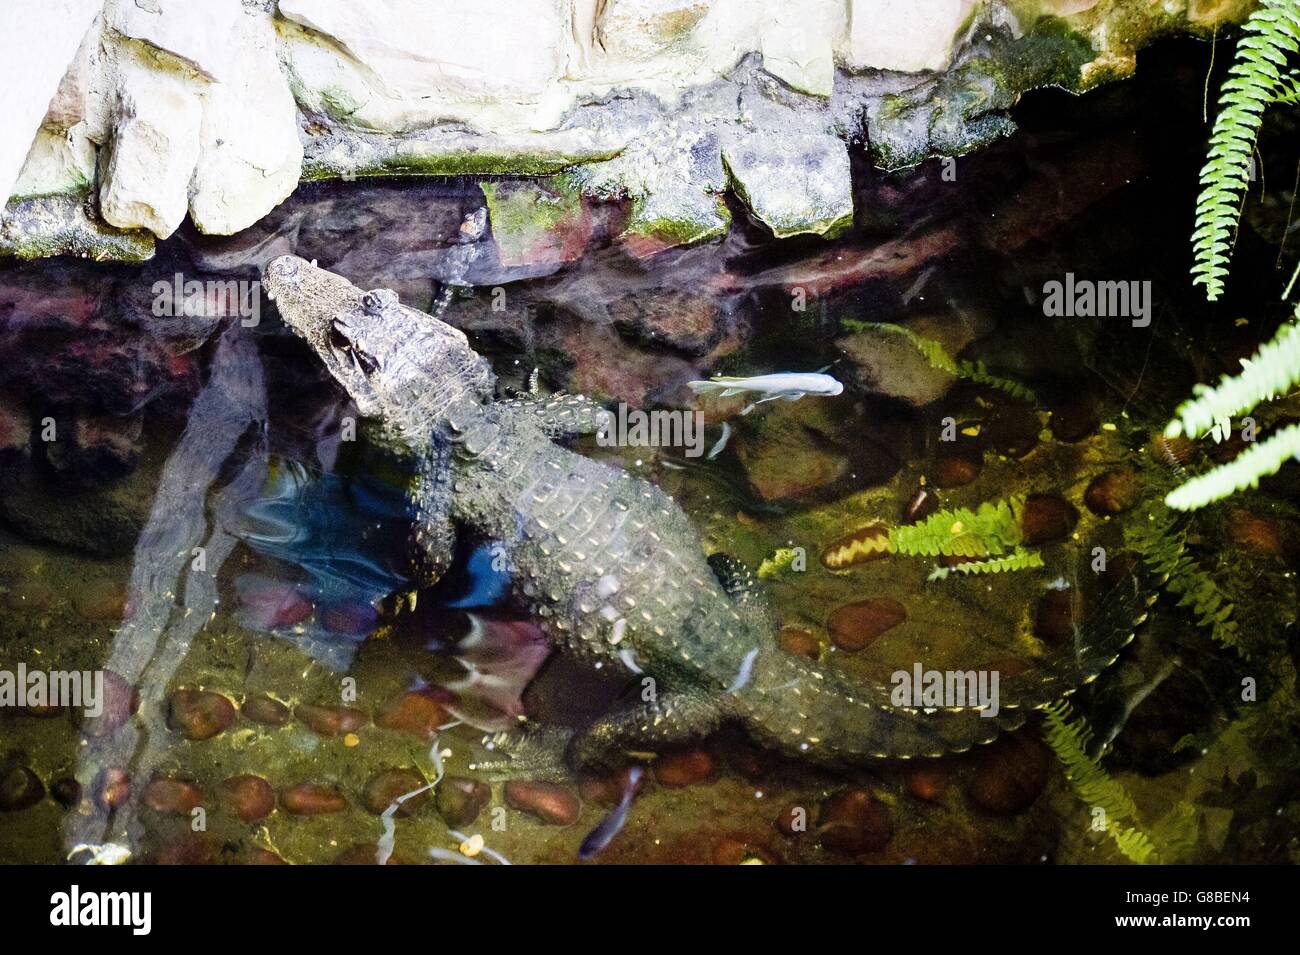 An eight-day-old, 15cm long, West African dwarf crocodile next to its mother after five youngsters hatched at Bristol Zoo Gardens, after three months of natural incubation. Stock Photo